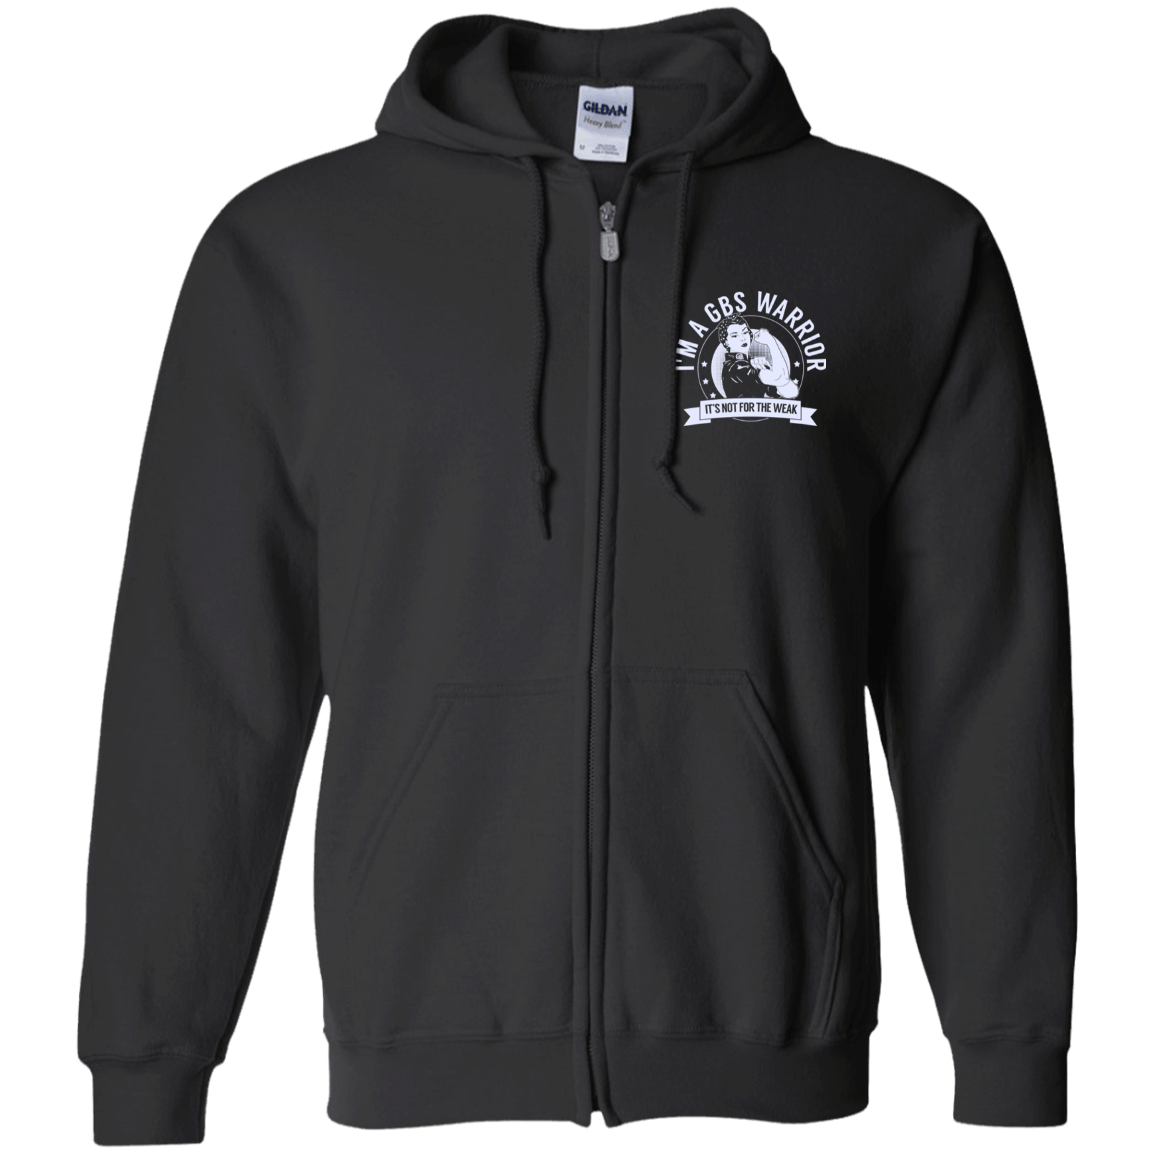 Guillain-Barré Syndrome - GBS Warrior Not For The Weak Zip Up Hooded Sweatshirt - The Unchargeables